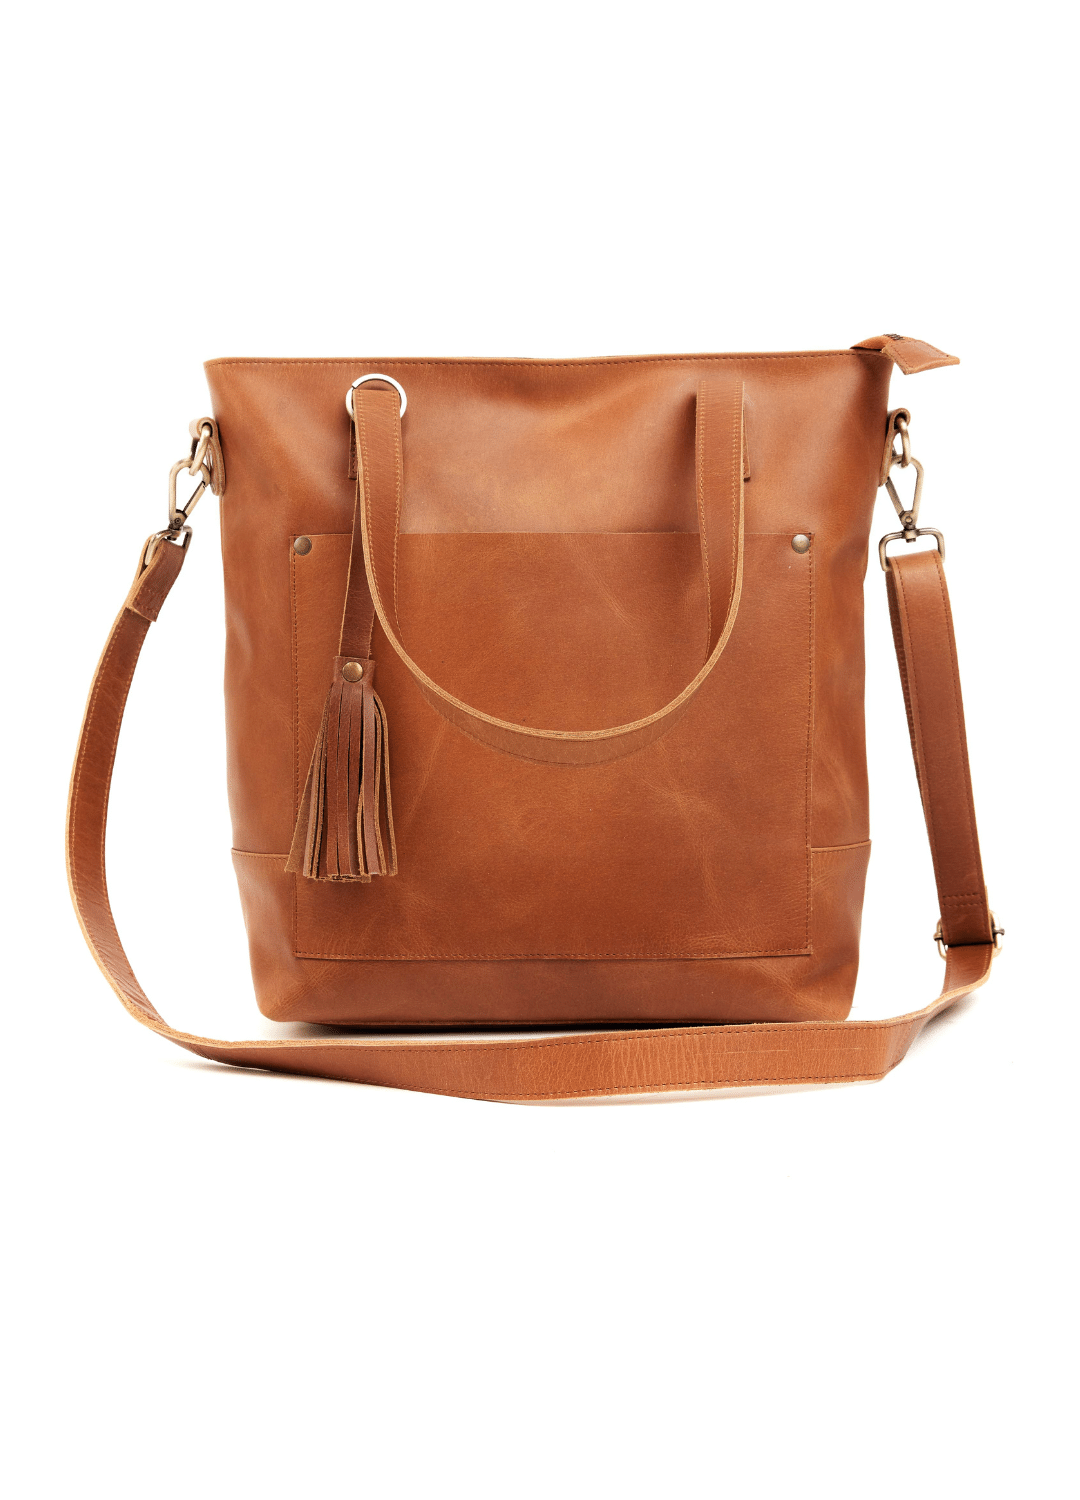 Crossbody bag for man in genuine leather LORENZO, HONEY, MADE IN ITALY, MENS LEATHER CROSSBODY BAGS